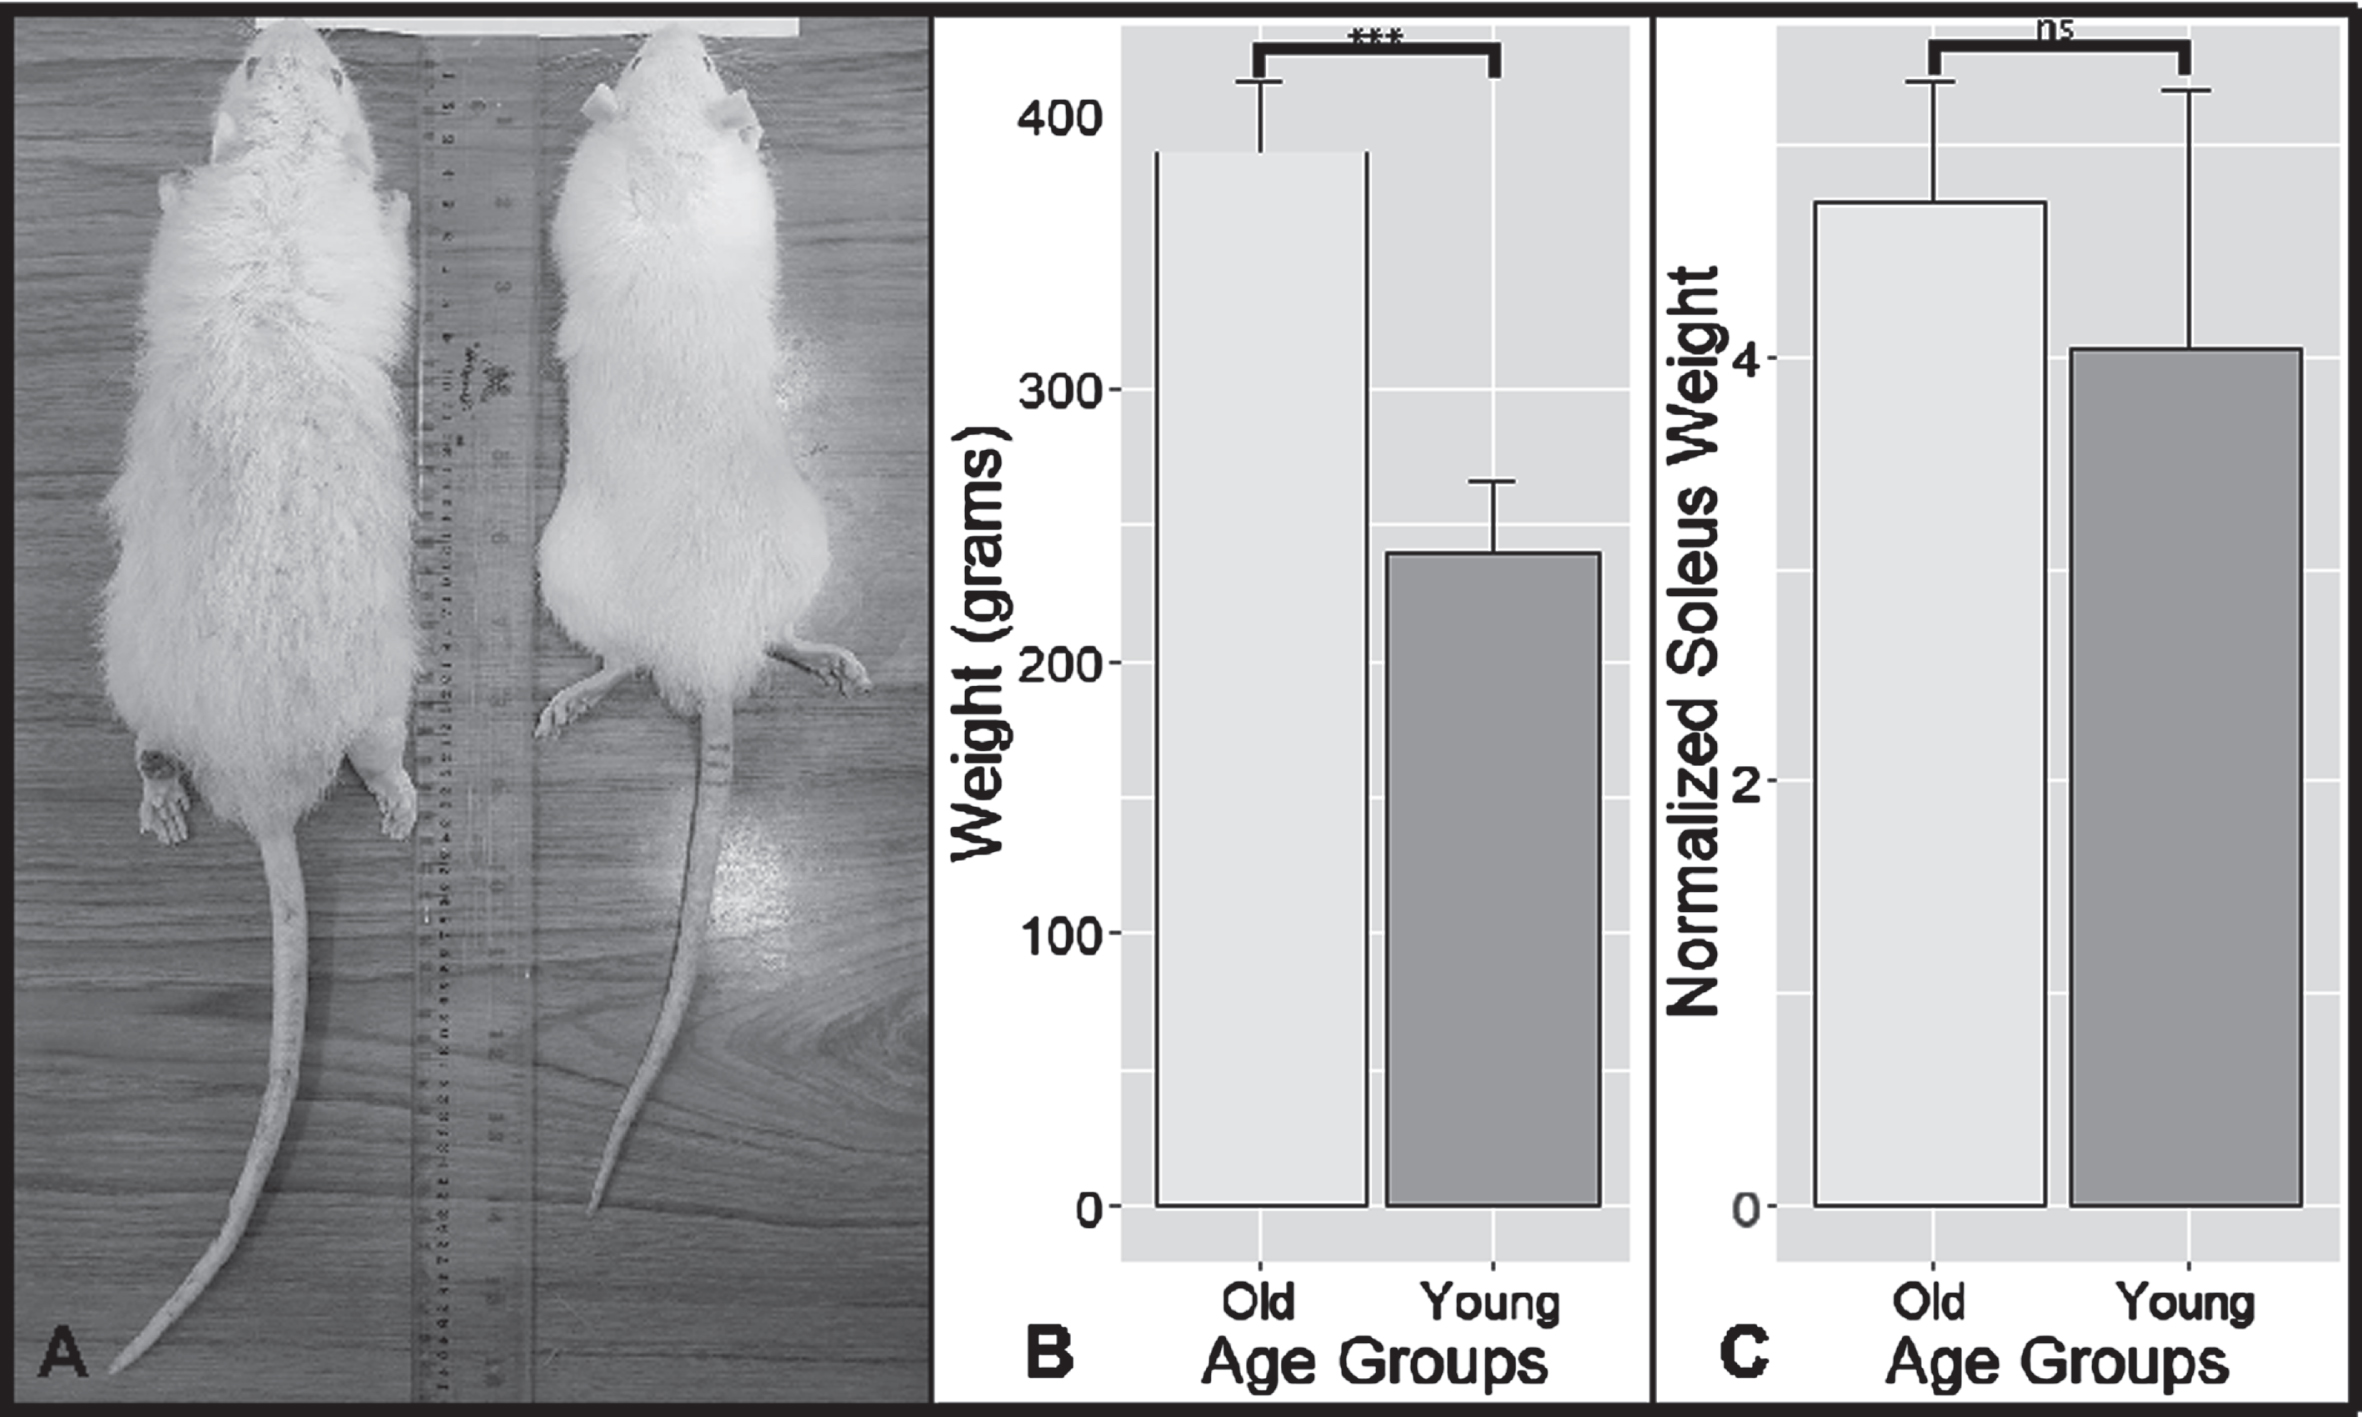 Old and Young Animal Models results. (A) Photos of old (left) and young (right) rats side by side. Notice the more extensive body mass and fur thinning on the old rat compared to the young rat. (B) A bar graph depicting the comparison of the mean weight of old and young rats. Notice the considerable larger weight of old rats (p < 0.001; 147.4g (109.20g–185.60g)). (C) A bar graph comparing the normalized weight of the soleus muscle with their respective weight. Normalized values were multiplied by 10,000 to aid visualization. ***: highly significant differences with the level of p < 0.001. ns: no significant differences with the level of p > 0.05. Error bars: standard deviation.